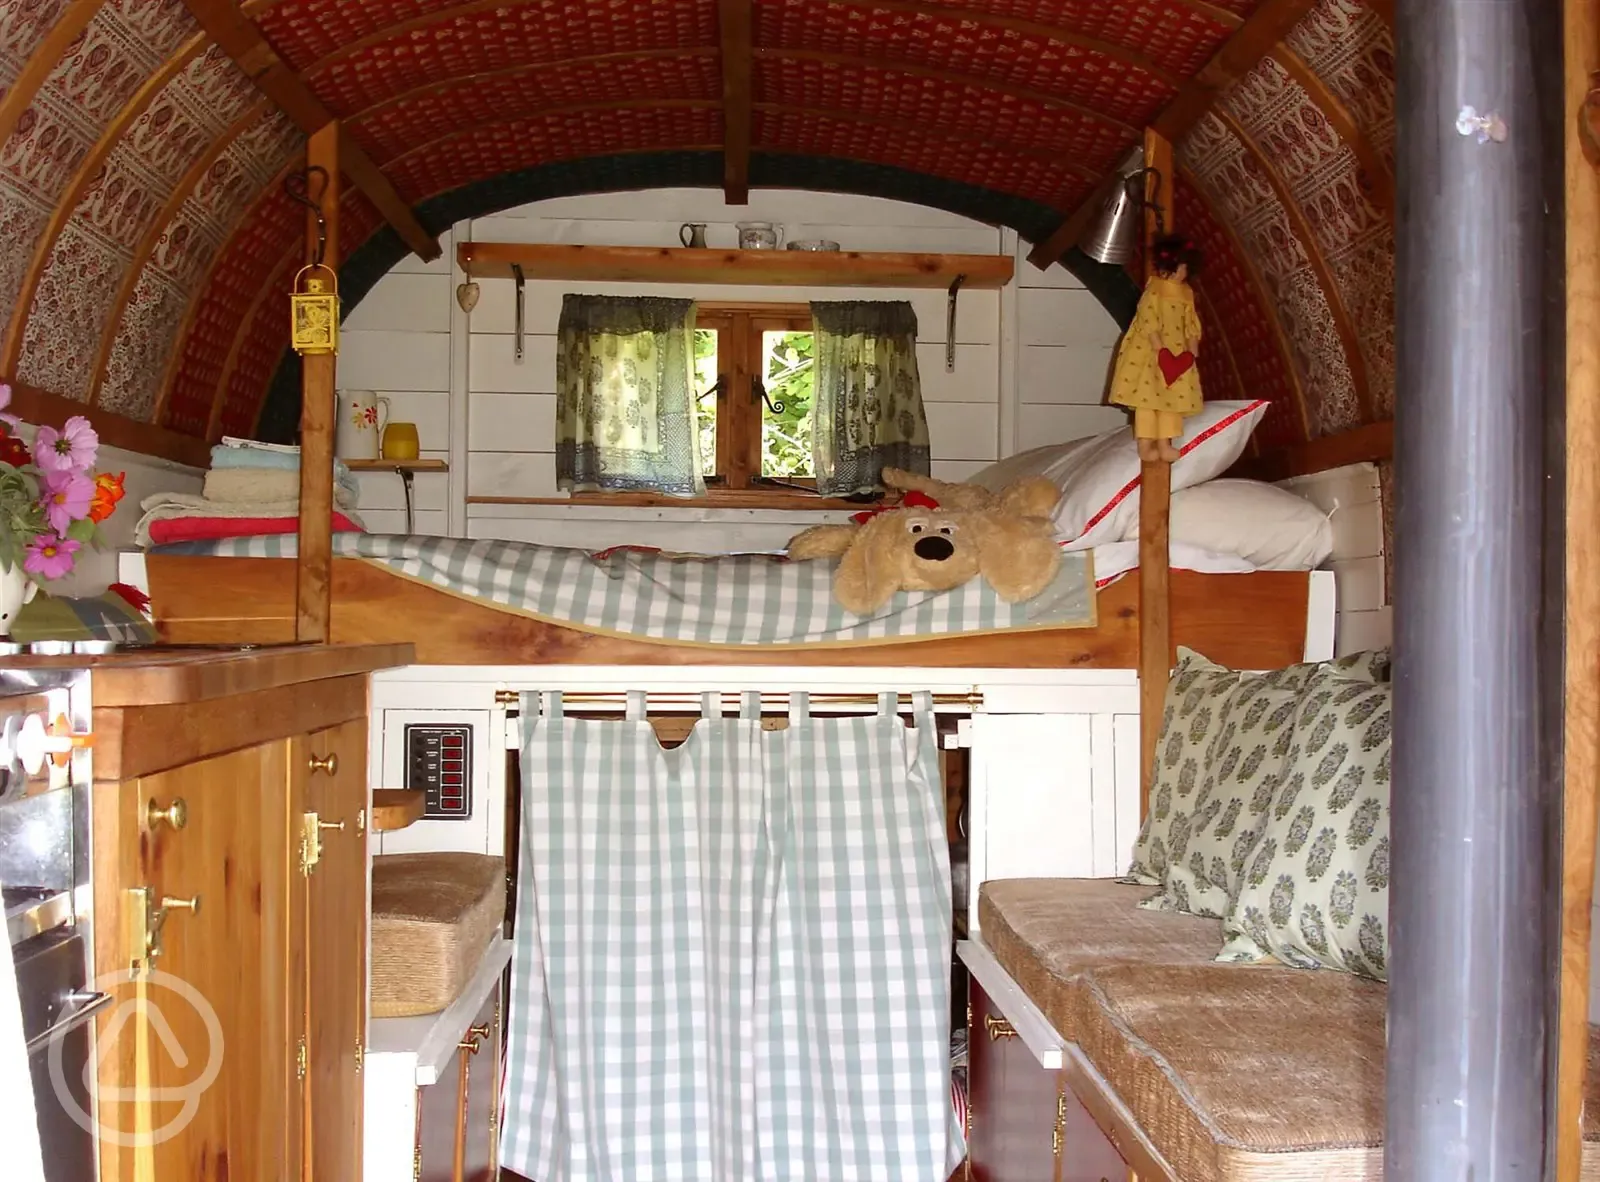 inside the fully-equipped gypsy caravan